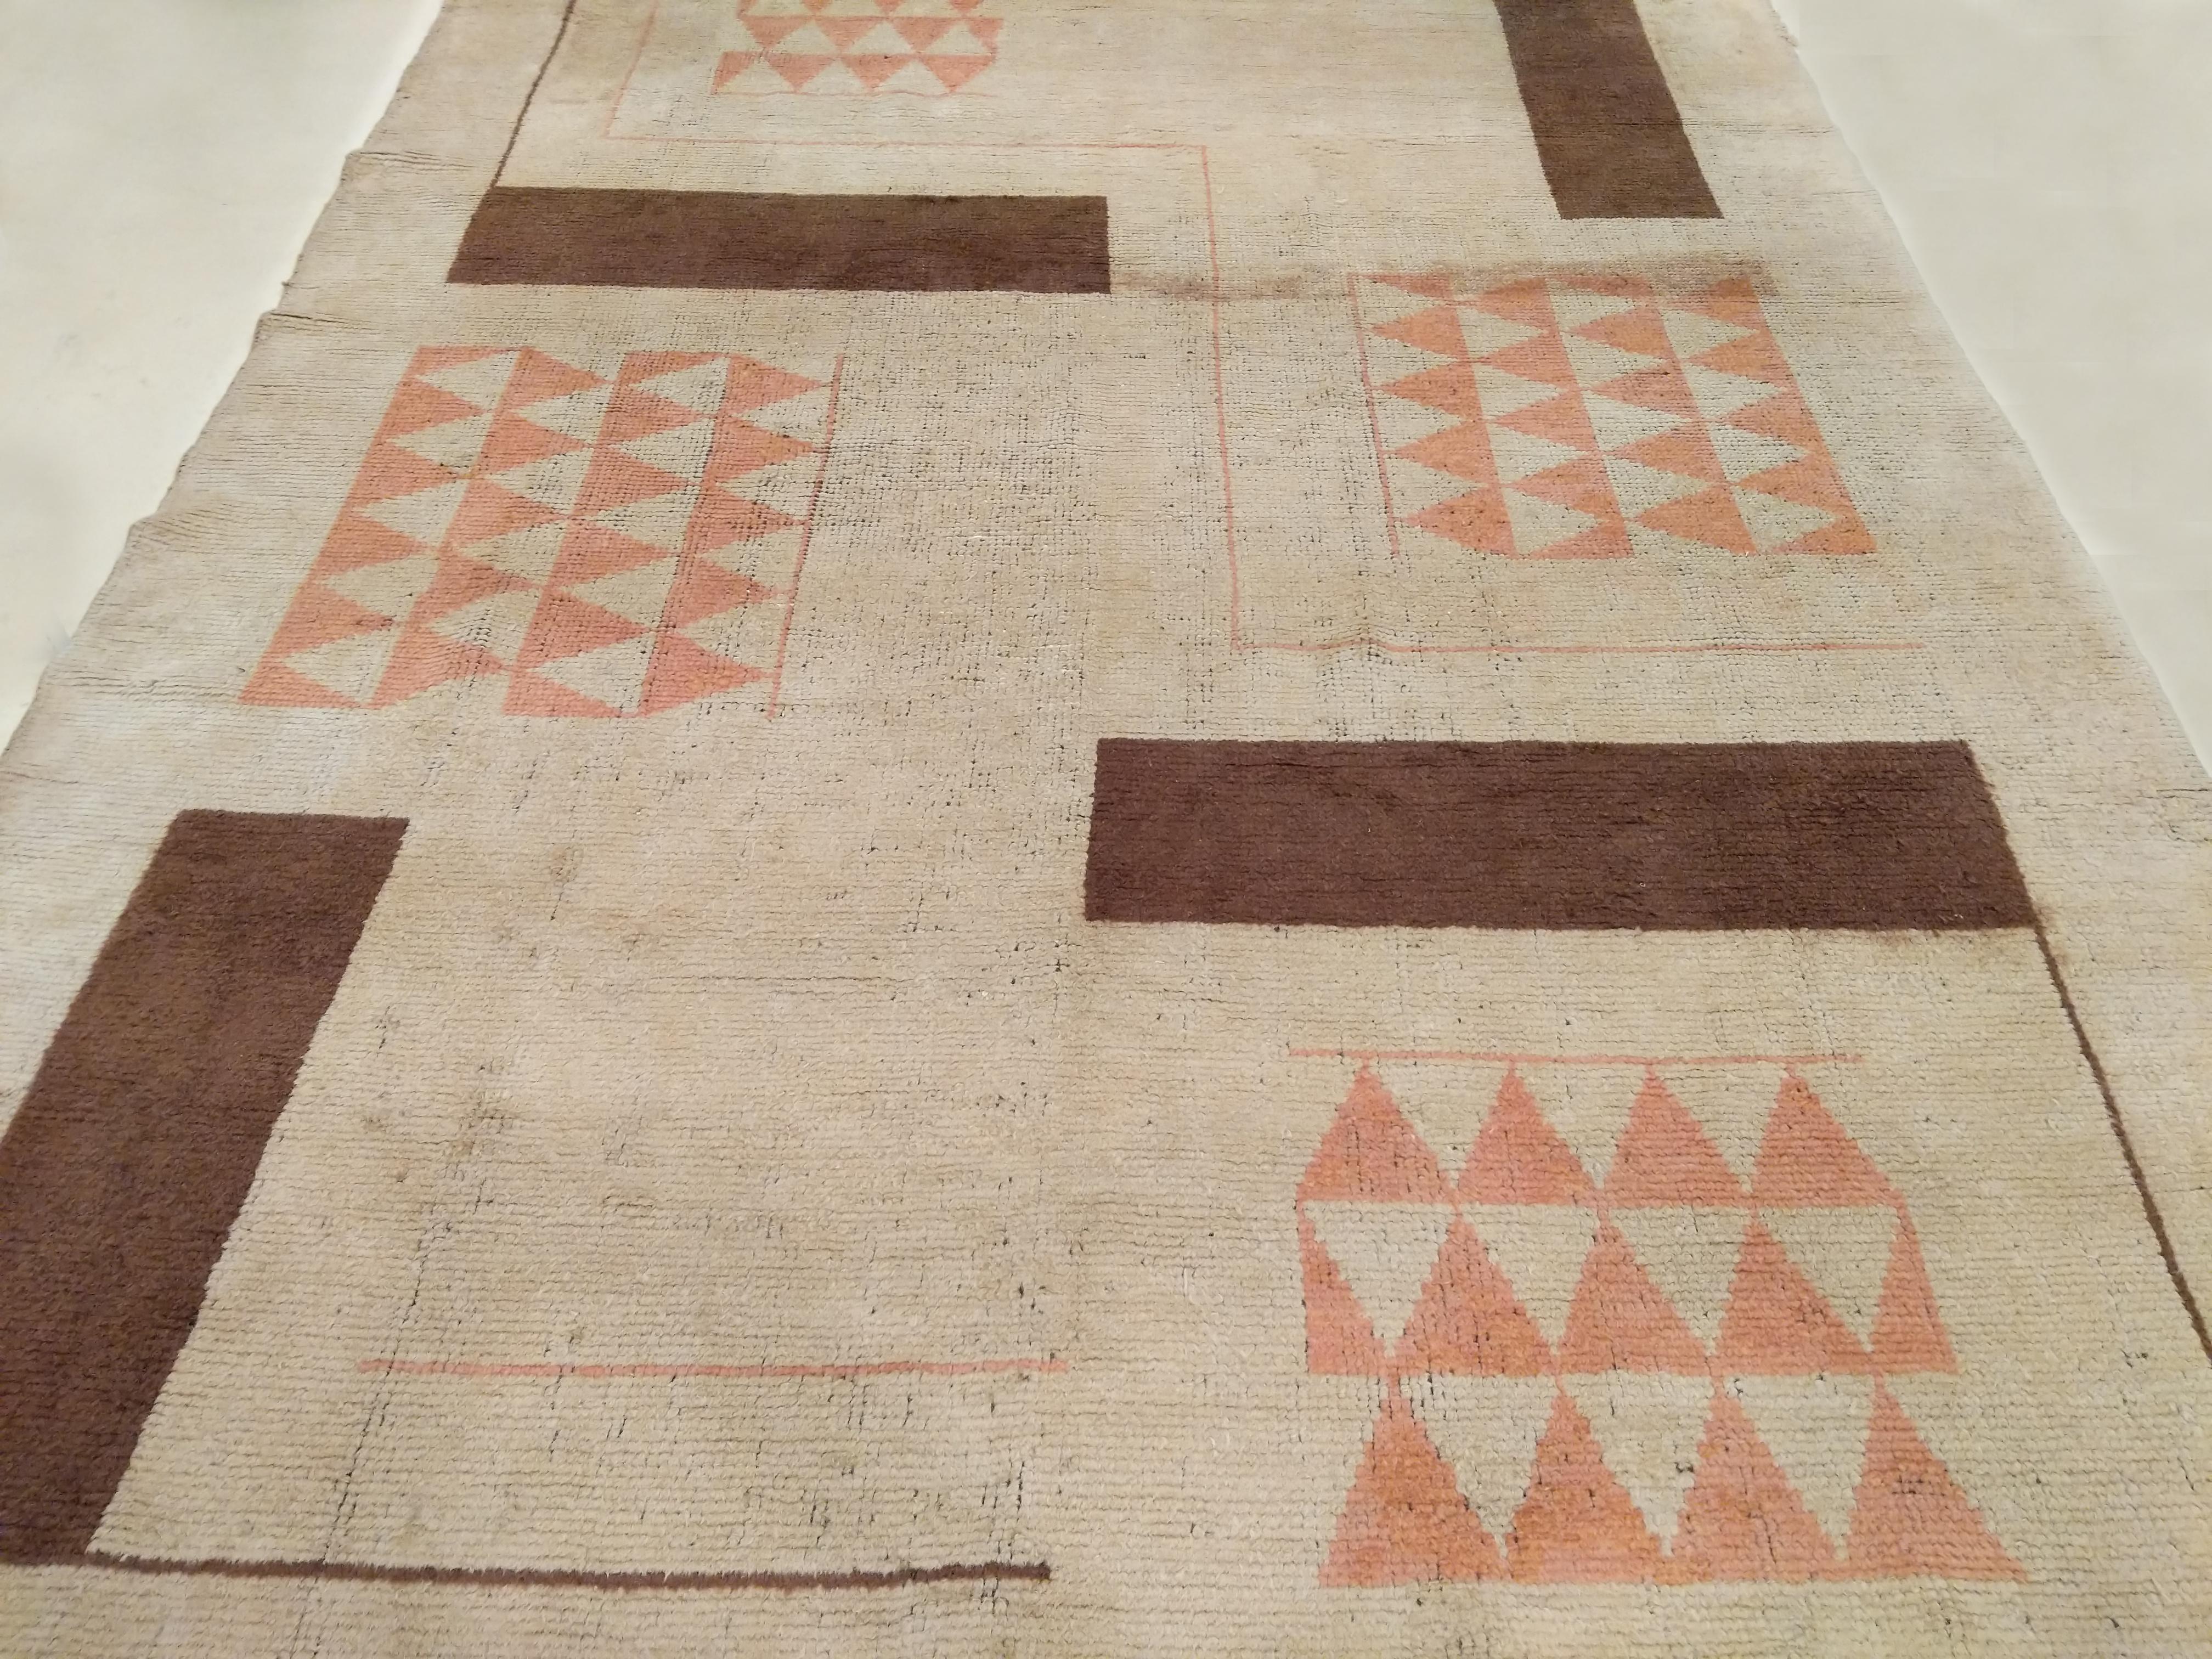 The rare examples which can be attributed to Ivan da Silva Bruhns (1881-1980) are among the most sought after French Art Deco carpets. Characterized by geometric elements clearly influenced by the stylistic trends of the artistic avant-garde such as